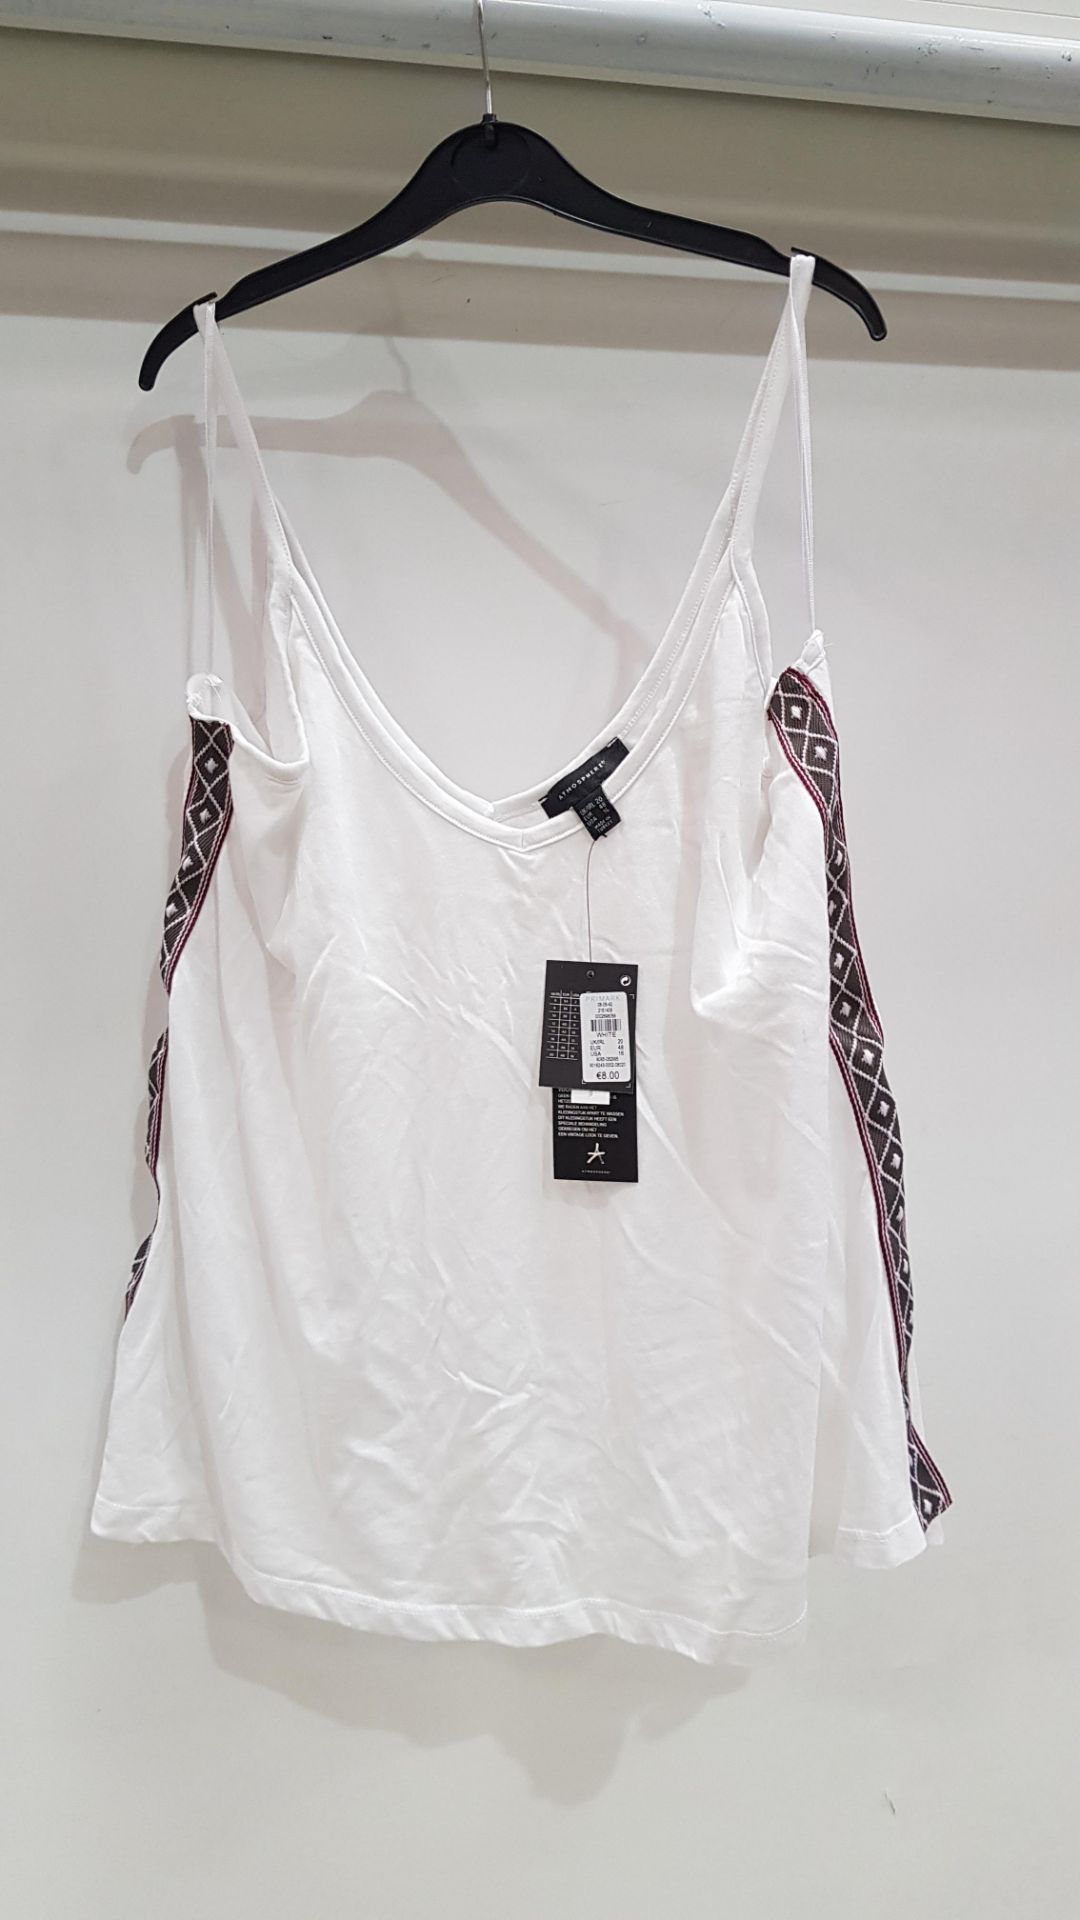 60 X BRAND NEW ATMOSPHERE SHOULDER STRAP WHITE TOP ALL IN VARIOUS SIZES (UK 6,8, 10, 12, 14, 16, 18,